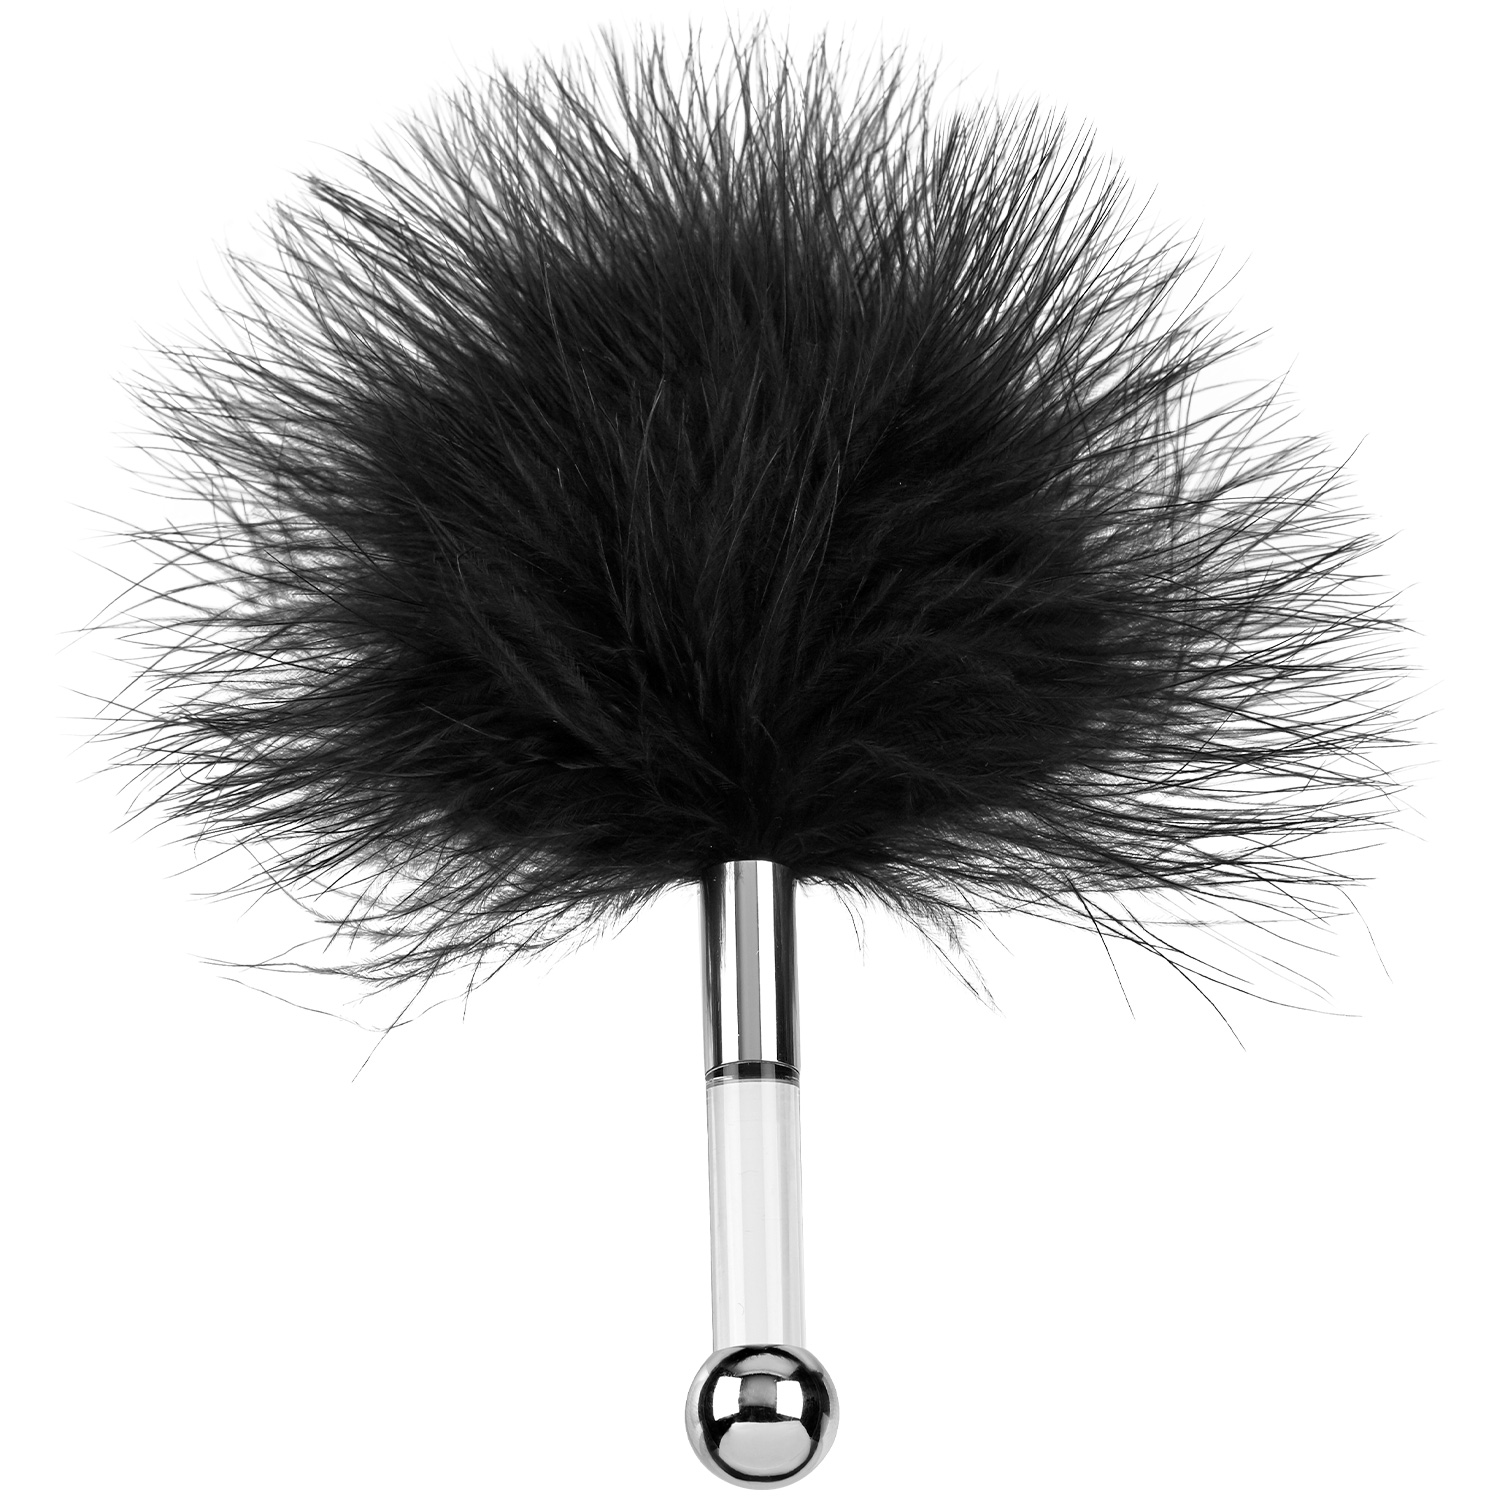 Sinful Deluxe Feather Tickler - Black